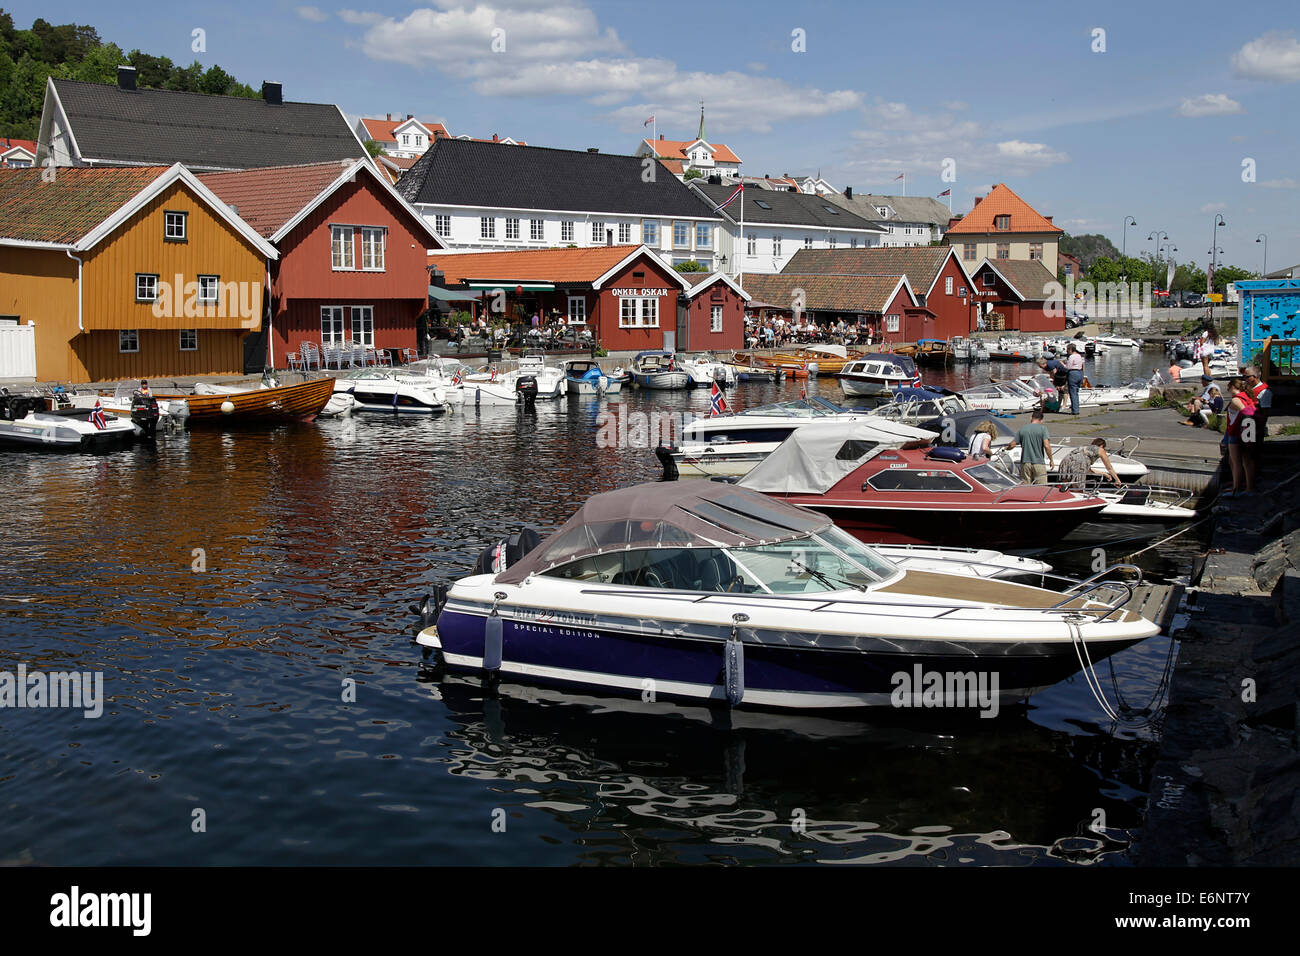 Narrow alleys and picturesque colorful wooden houses characterize Kragero that spread over three islands on the south coast of Norway on Skaggerak. Photo: Klaus Nowottnick Date: May 30, 2014 Stock Photo